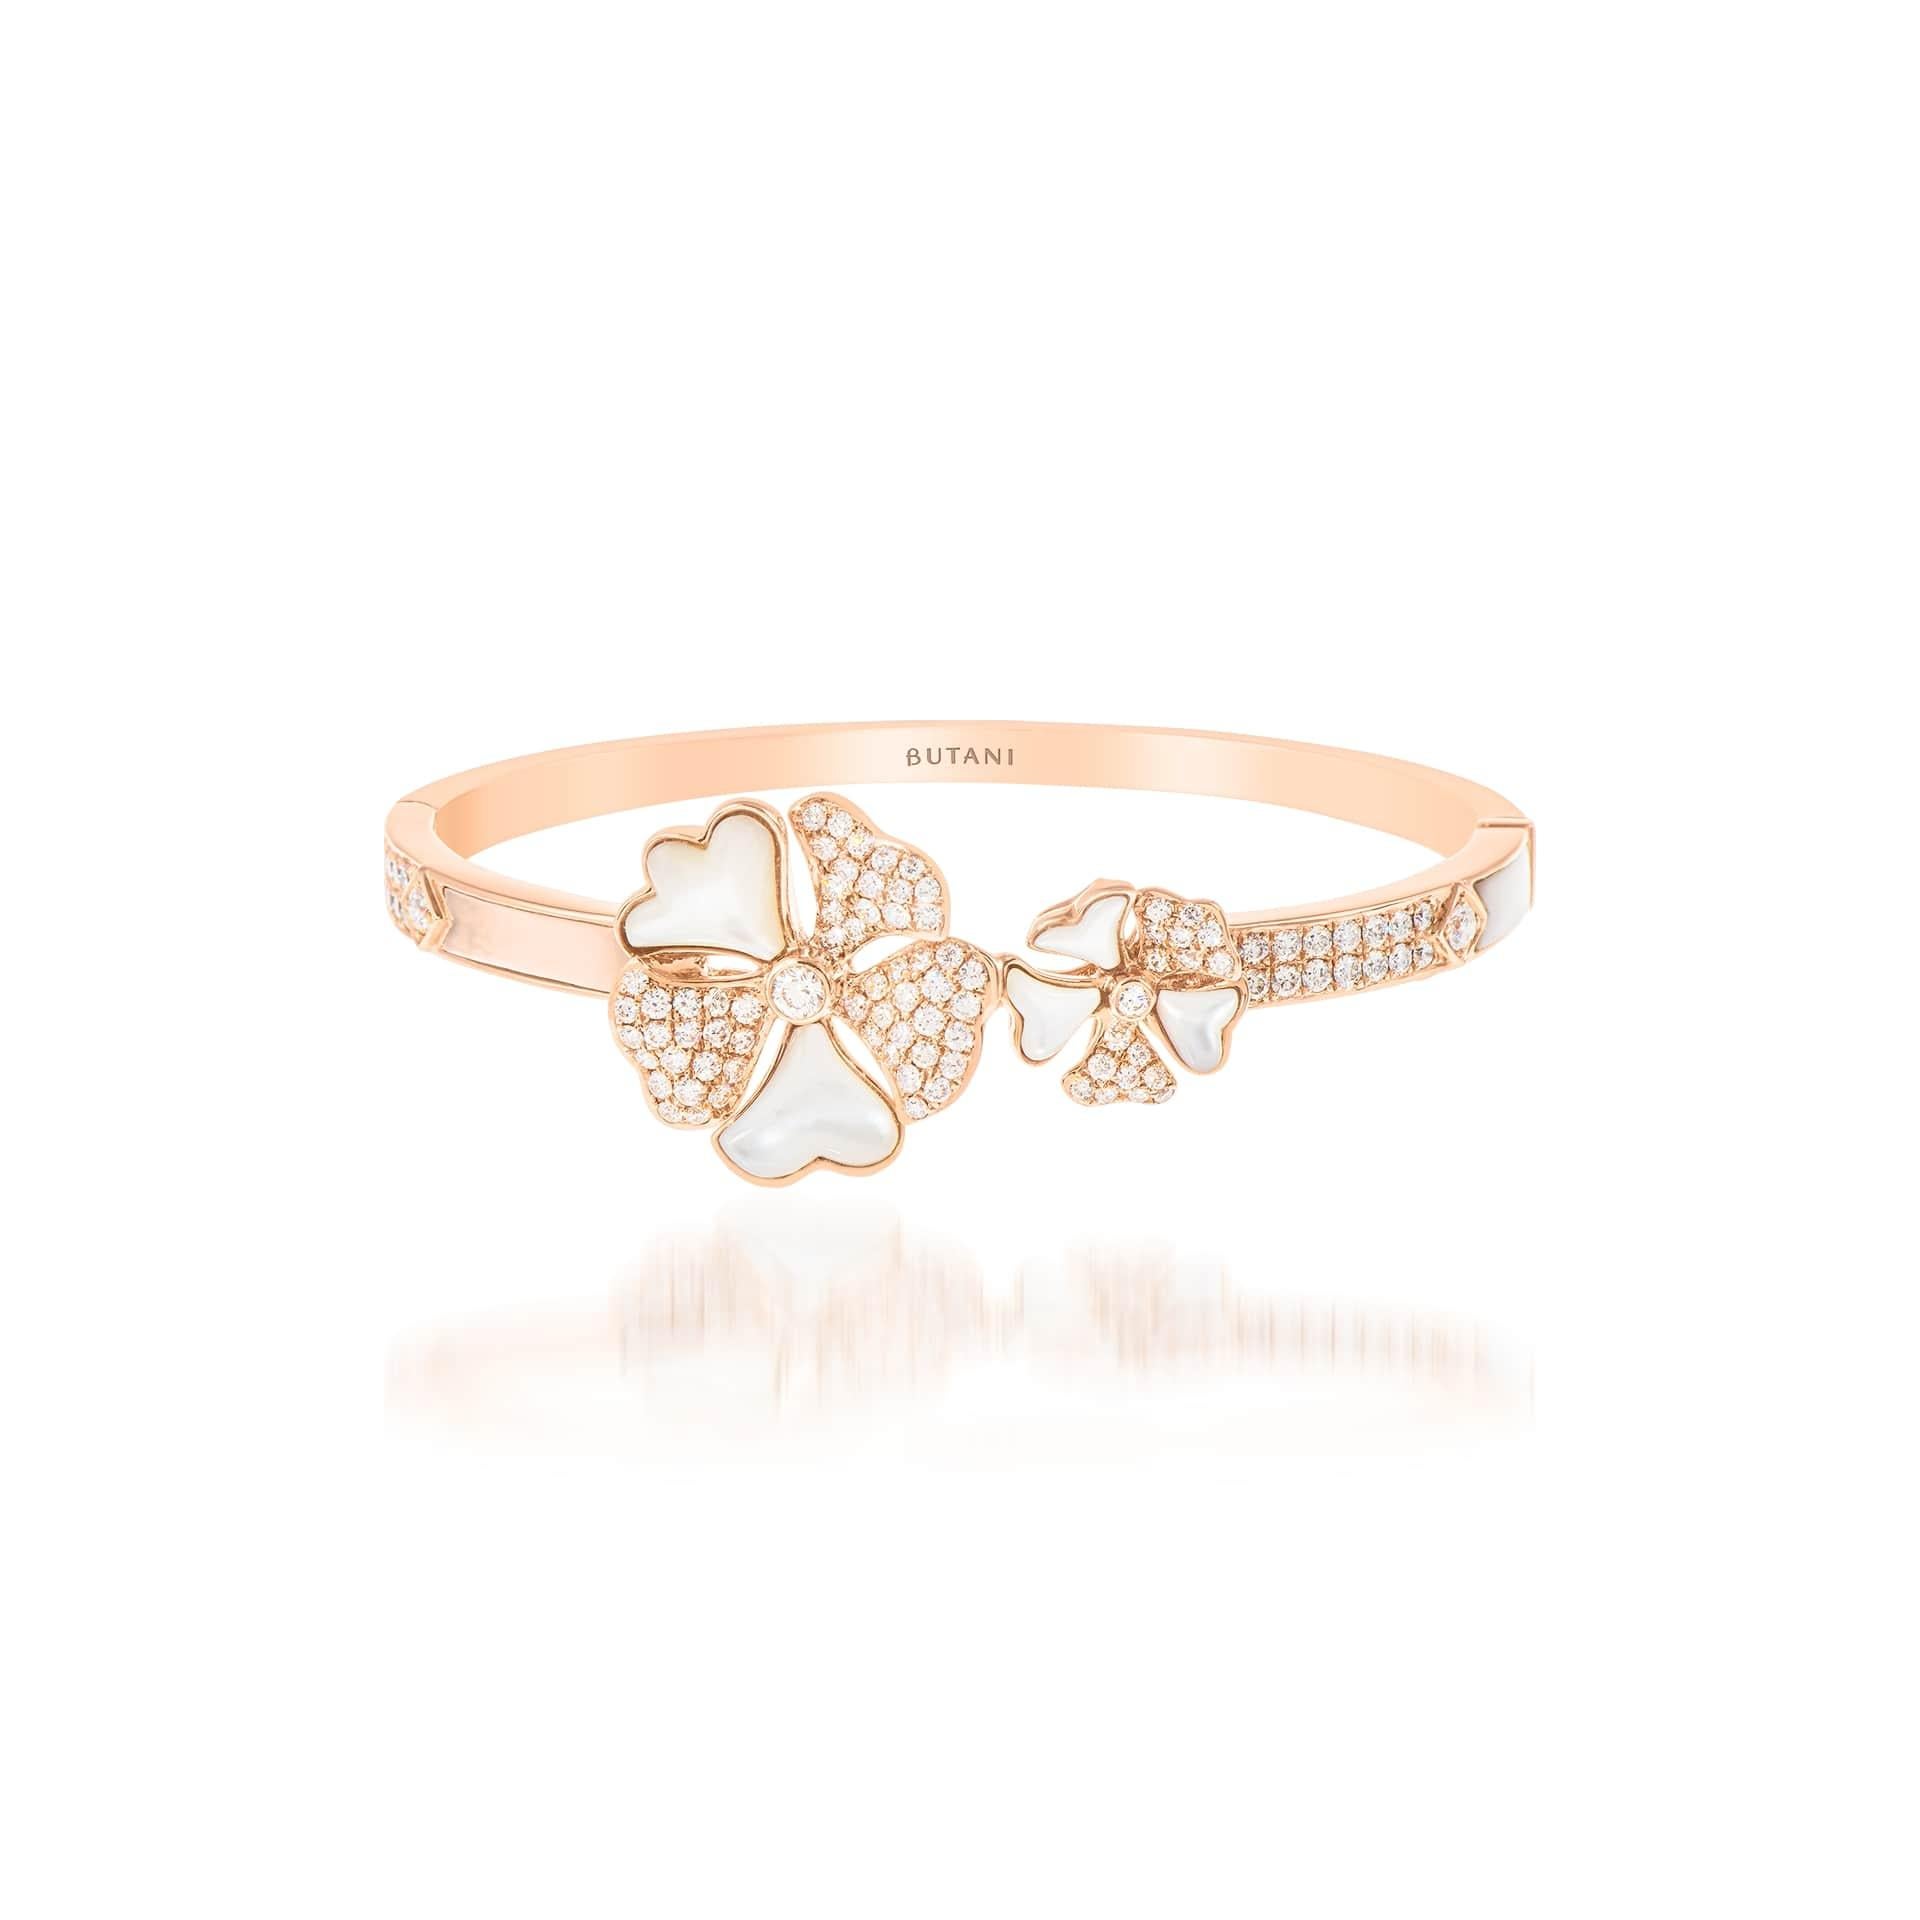 Bloom Diamond and Mother-of-Pearl Duo Flower Bangle in 18K Rose Gold

Inspired by the exquisite petals of the alpine cinquefoil flower, the Bloom collection combines the richness of diamonds and precious metals with the light versatility of this